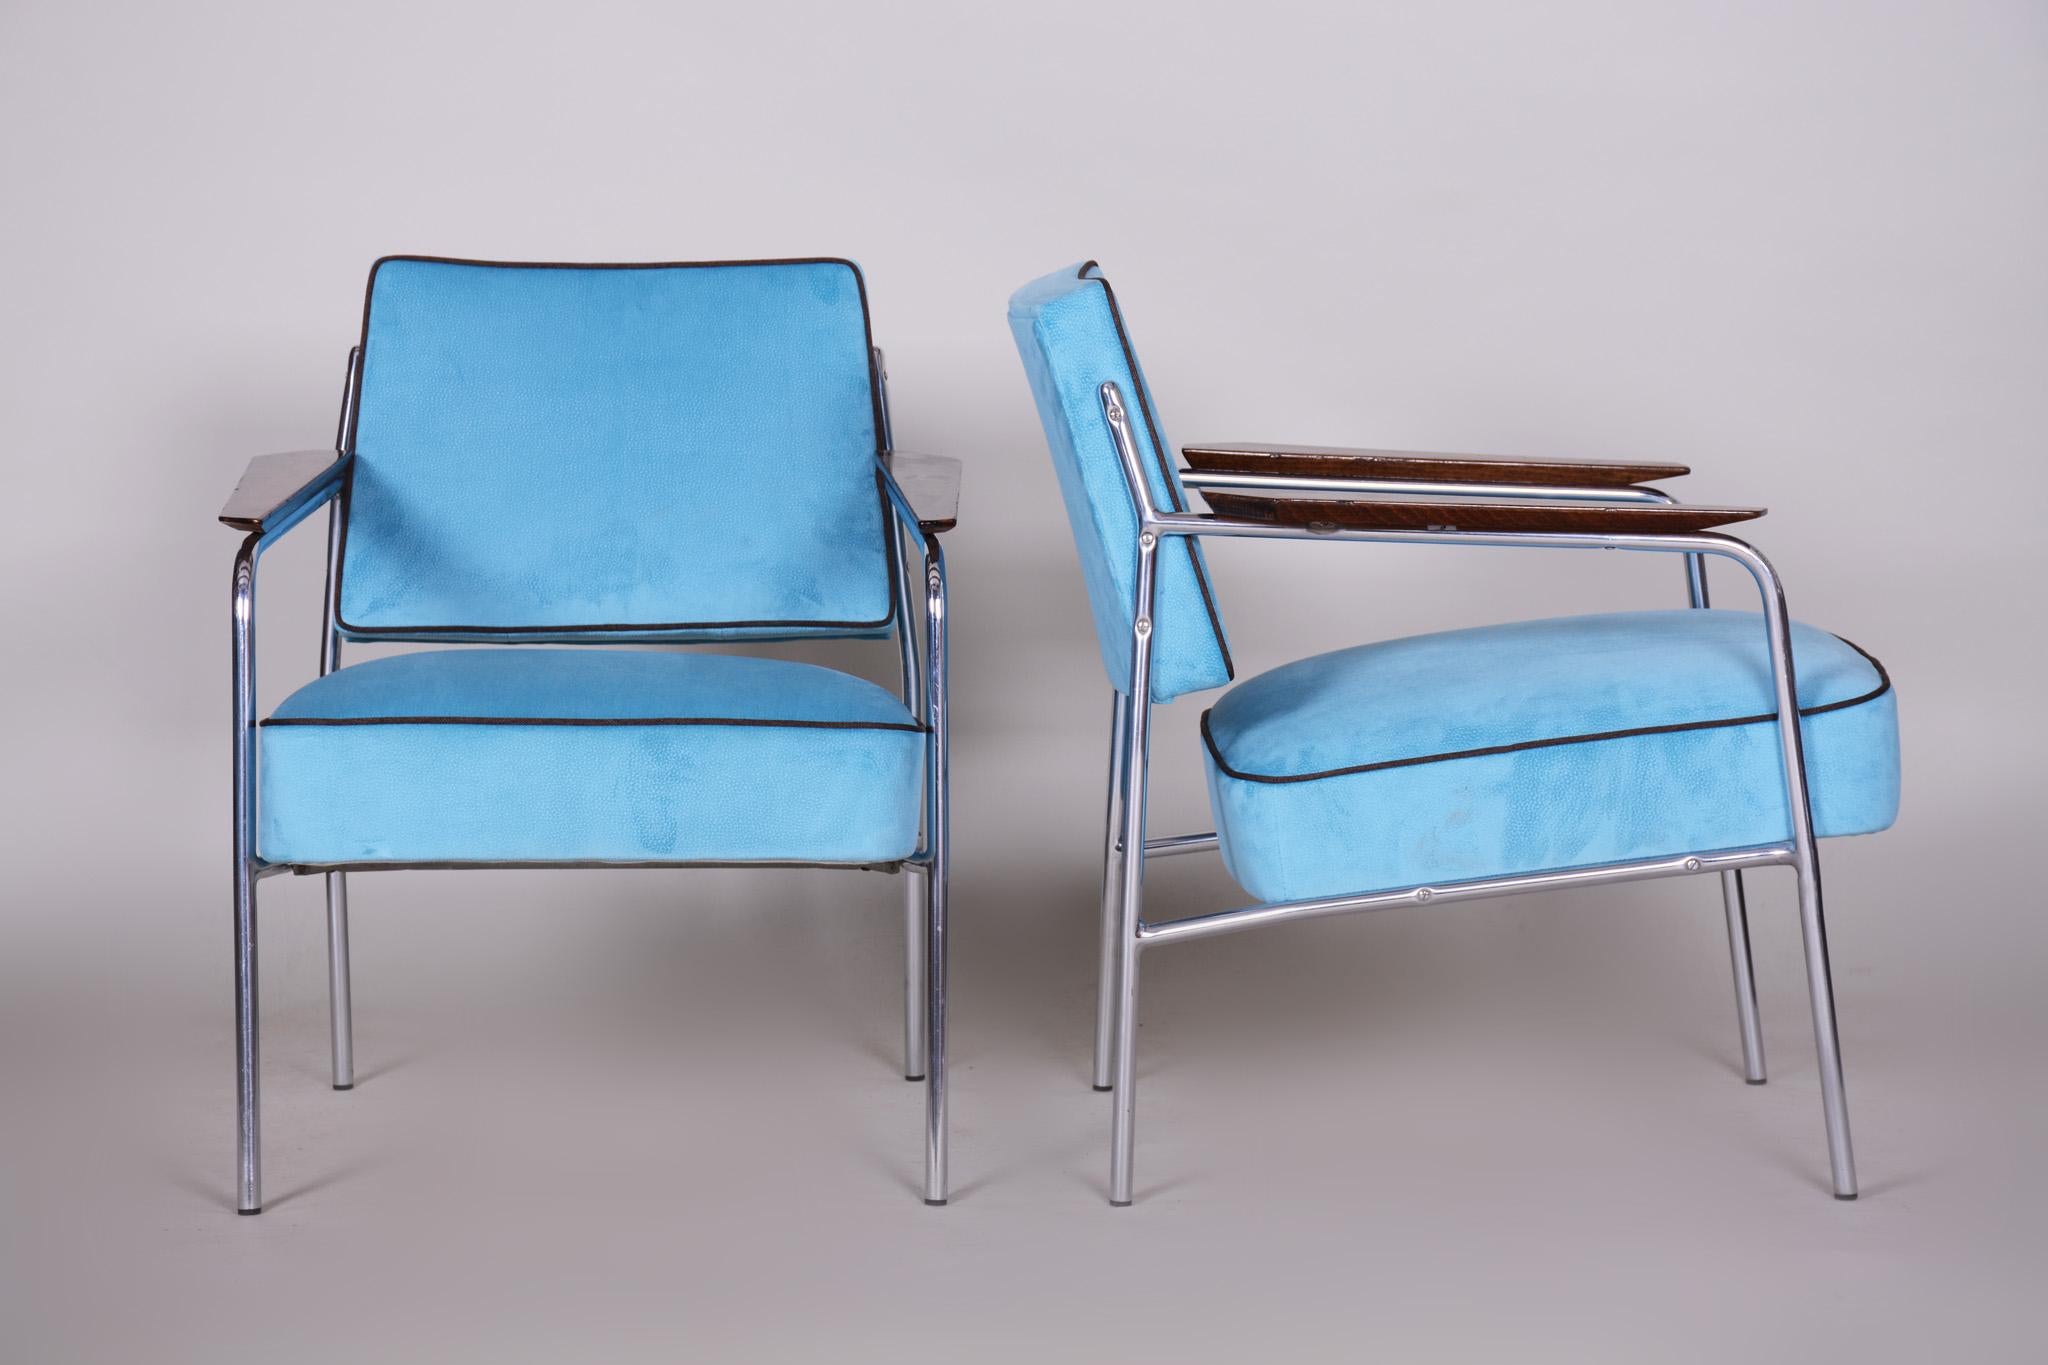 Tubular Chrome Bauhaus Blue Seating Set, 2 Armchairs and 4 Chairs, 1940s In Good Condition For Sale In Horomerice, CZ